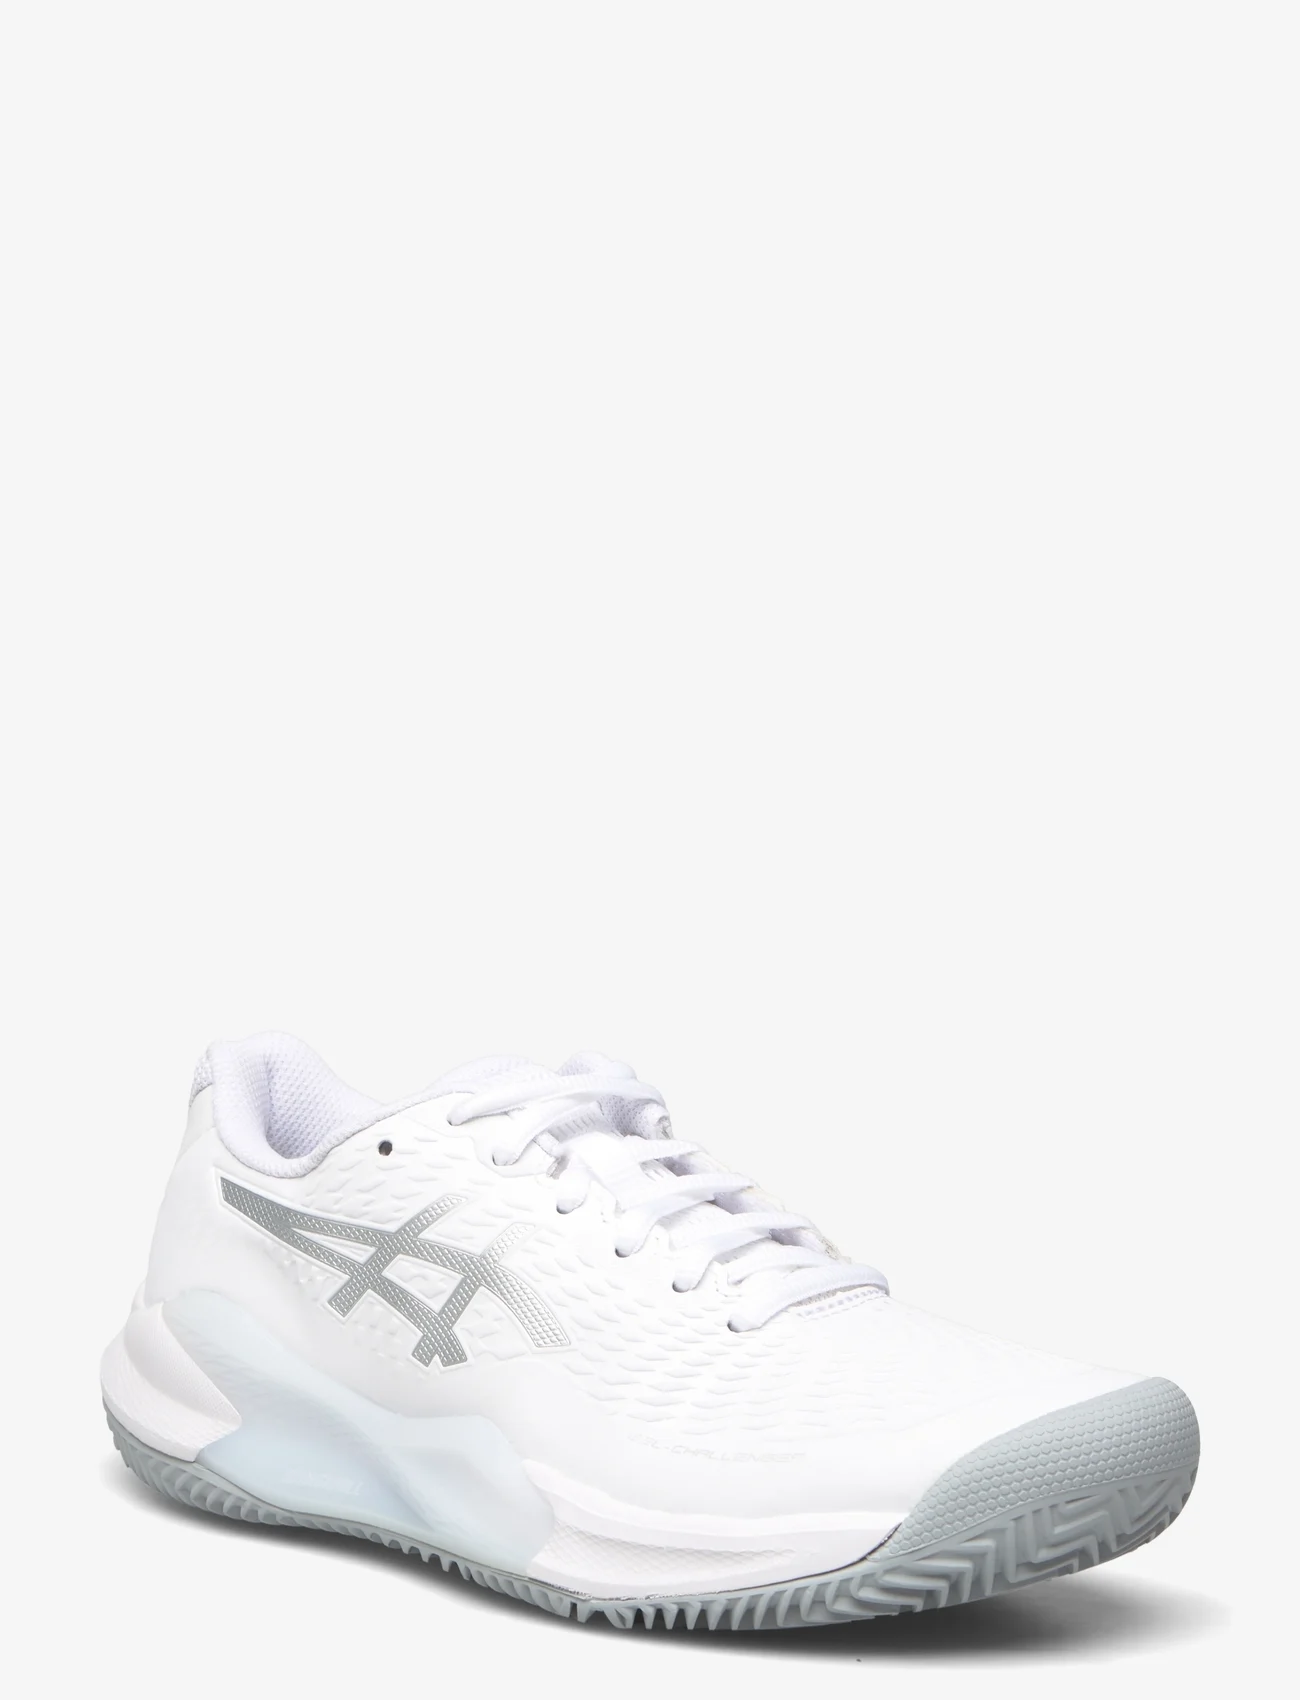 Asics - GEL-CHALLENGER 14 CLAY - white/pure silver - 0